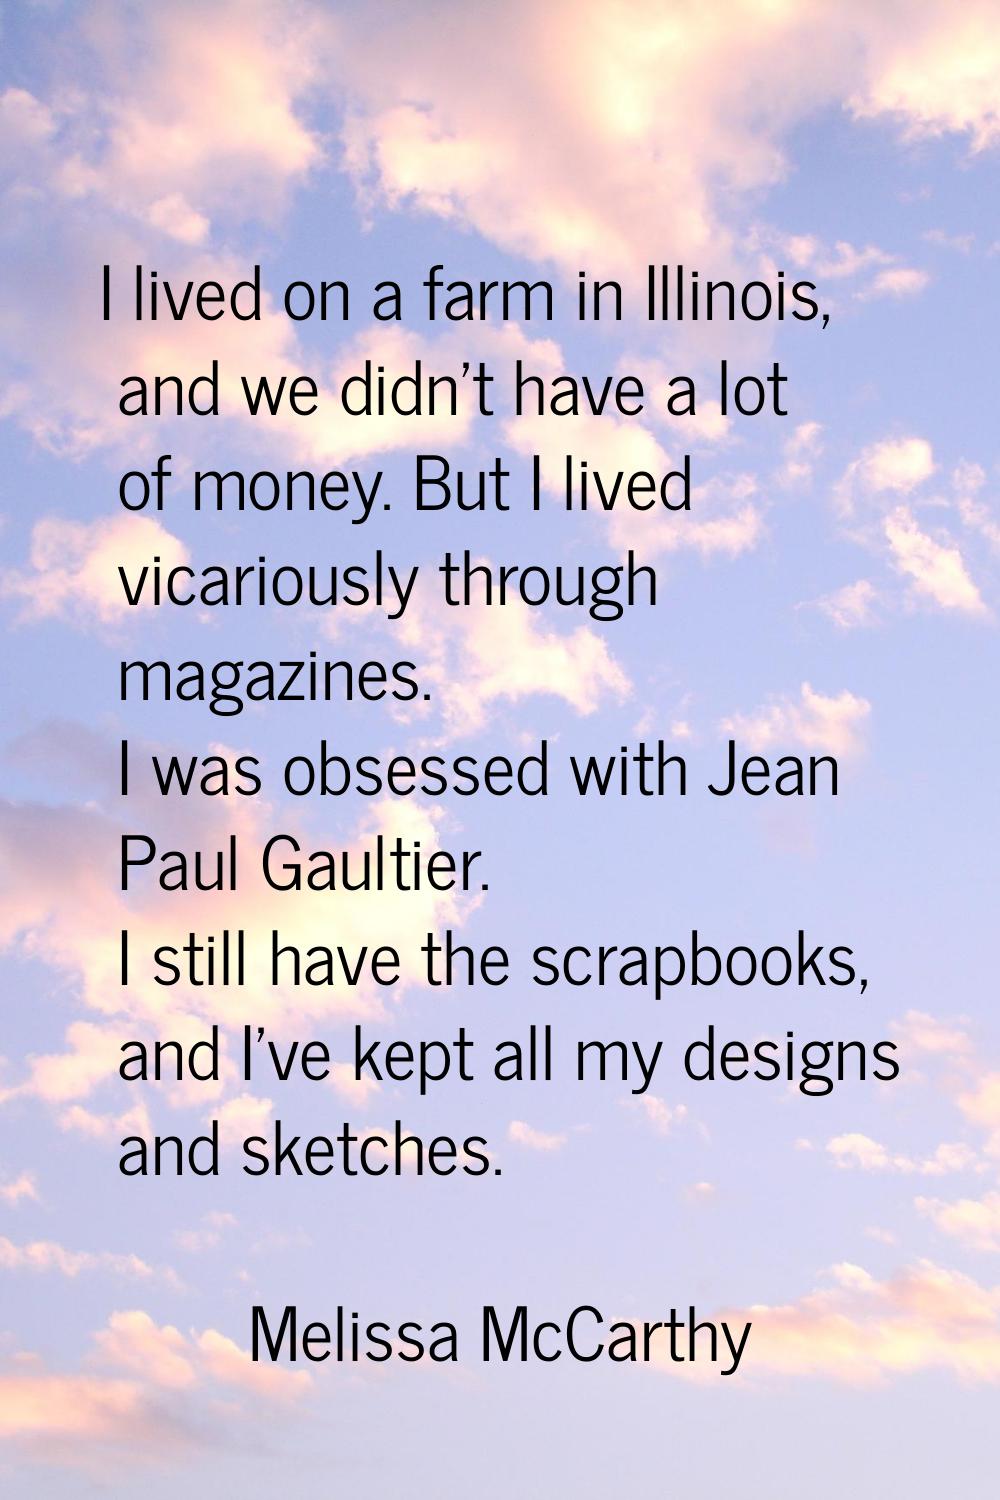 I lived on a farm in Illinois, and we didn't have a lot of money. But I lived vicariously through m